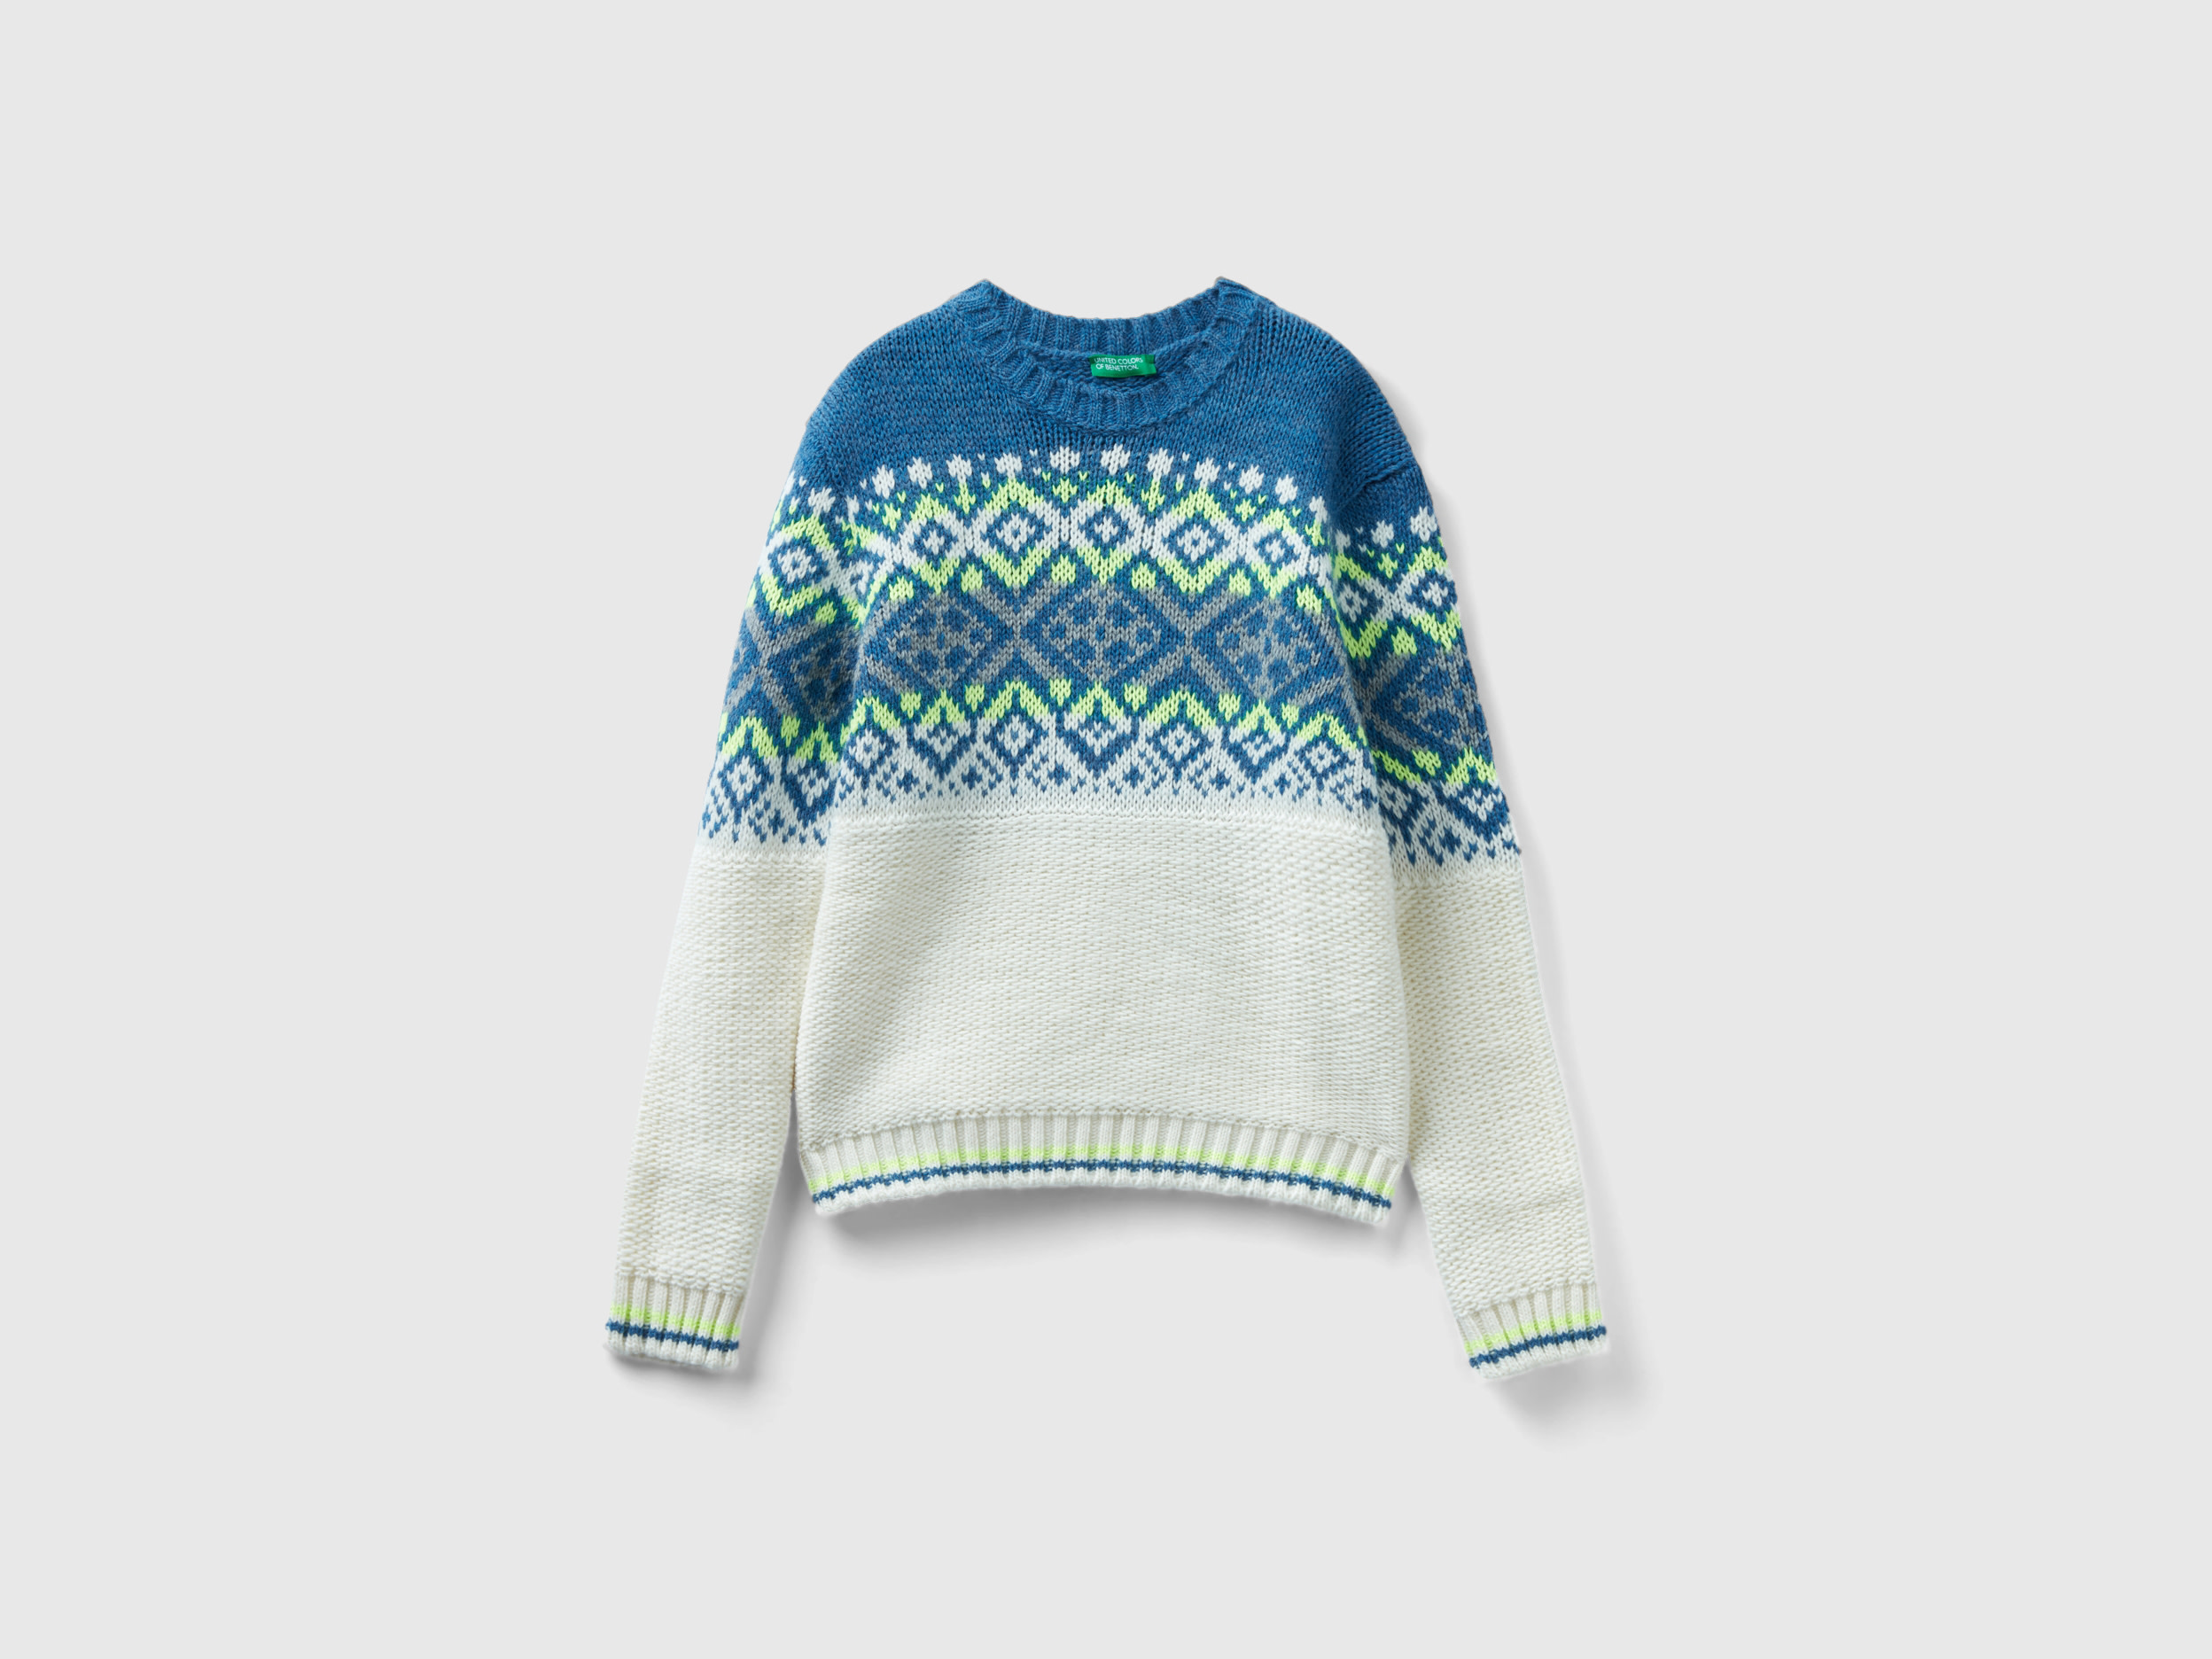 Benetton, Jacquard Sweater With Neon Details, size 2XL, Multi-color, Kids